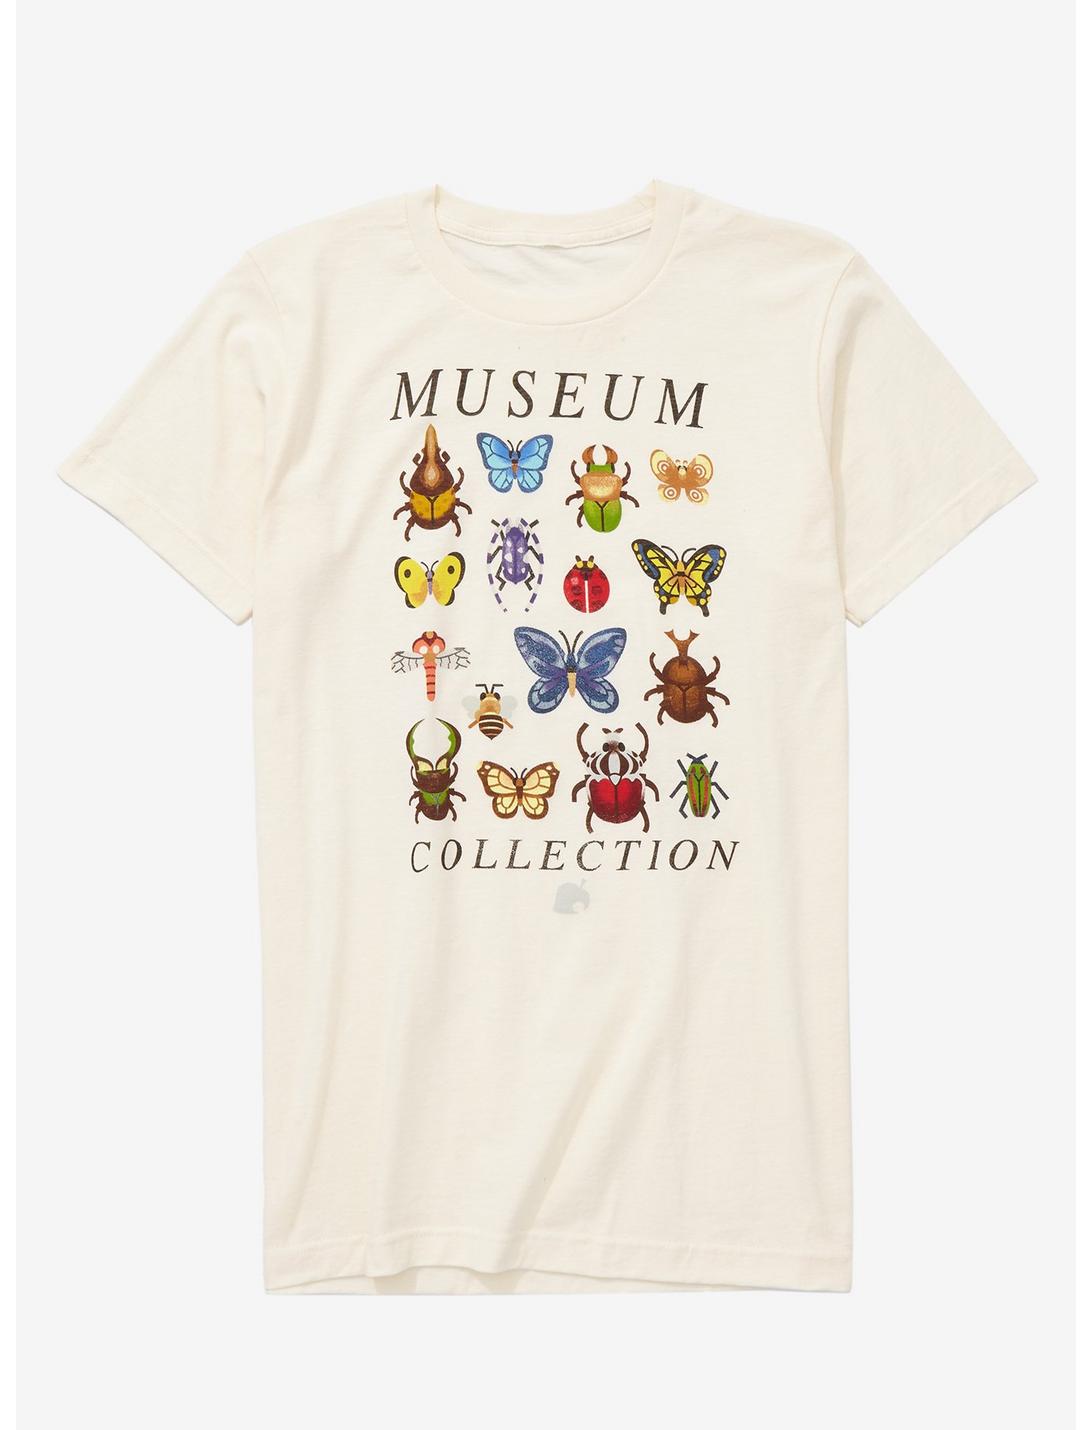 Nintendo Animal Crossing Museum Collection Women's  T-Shirt, OFF WHITE, hi-res